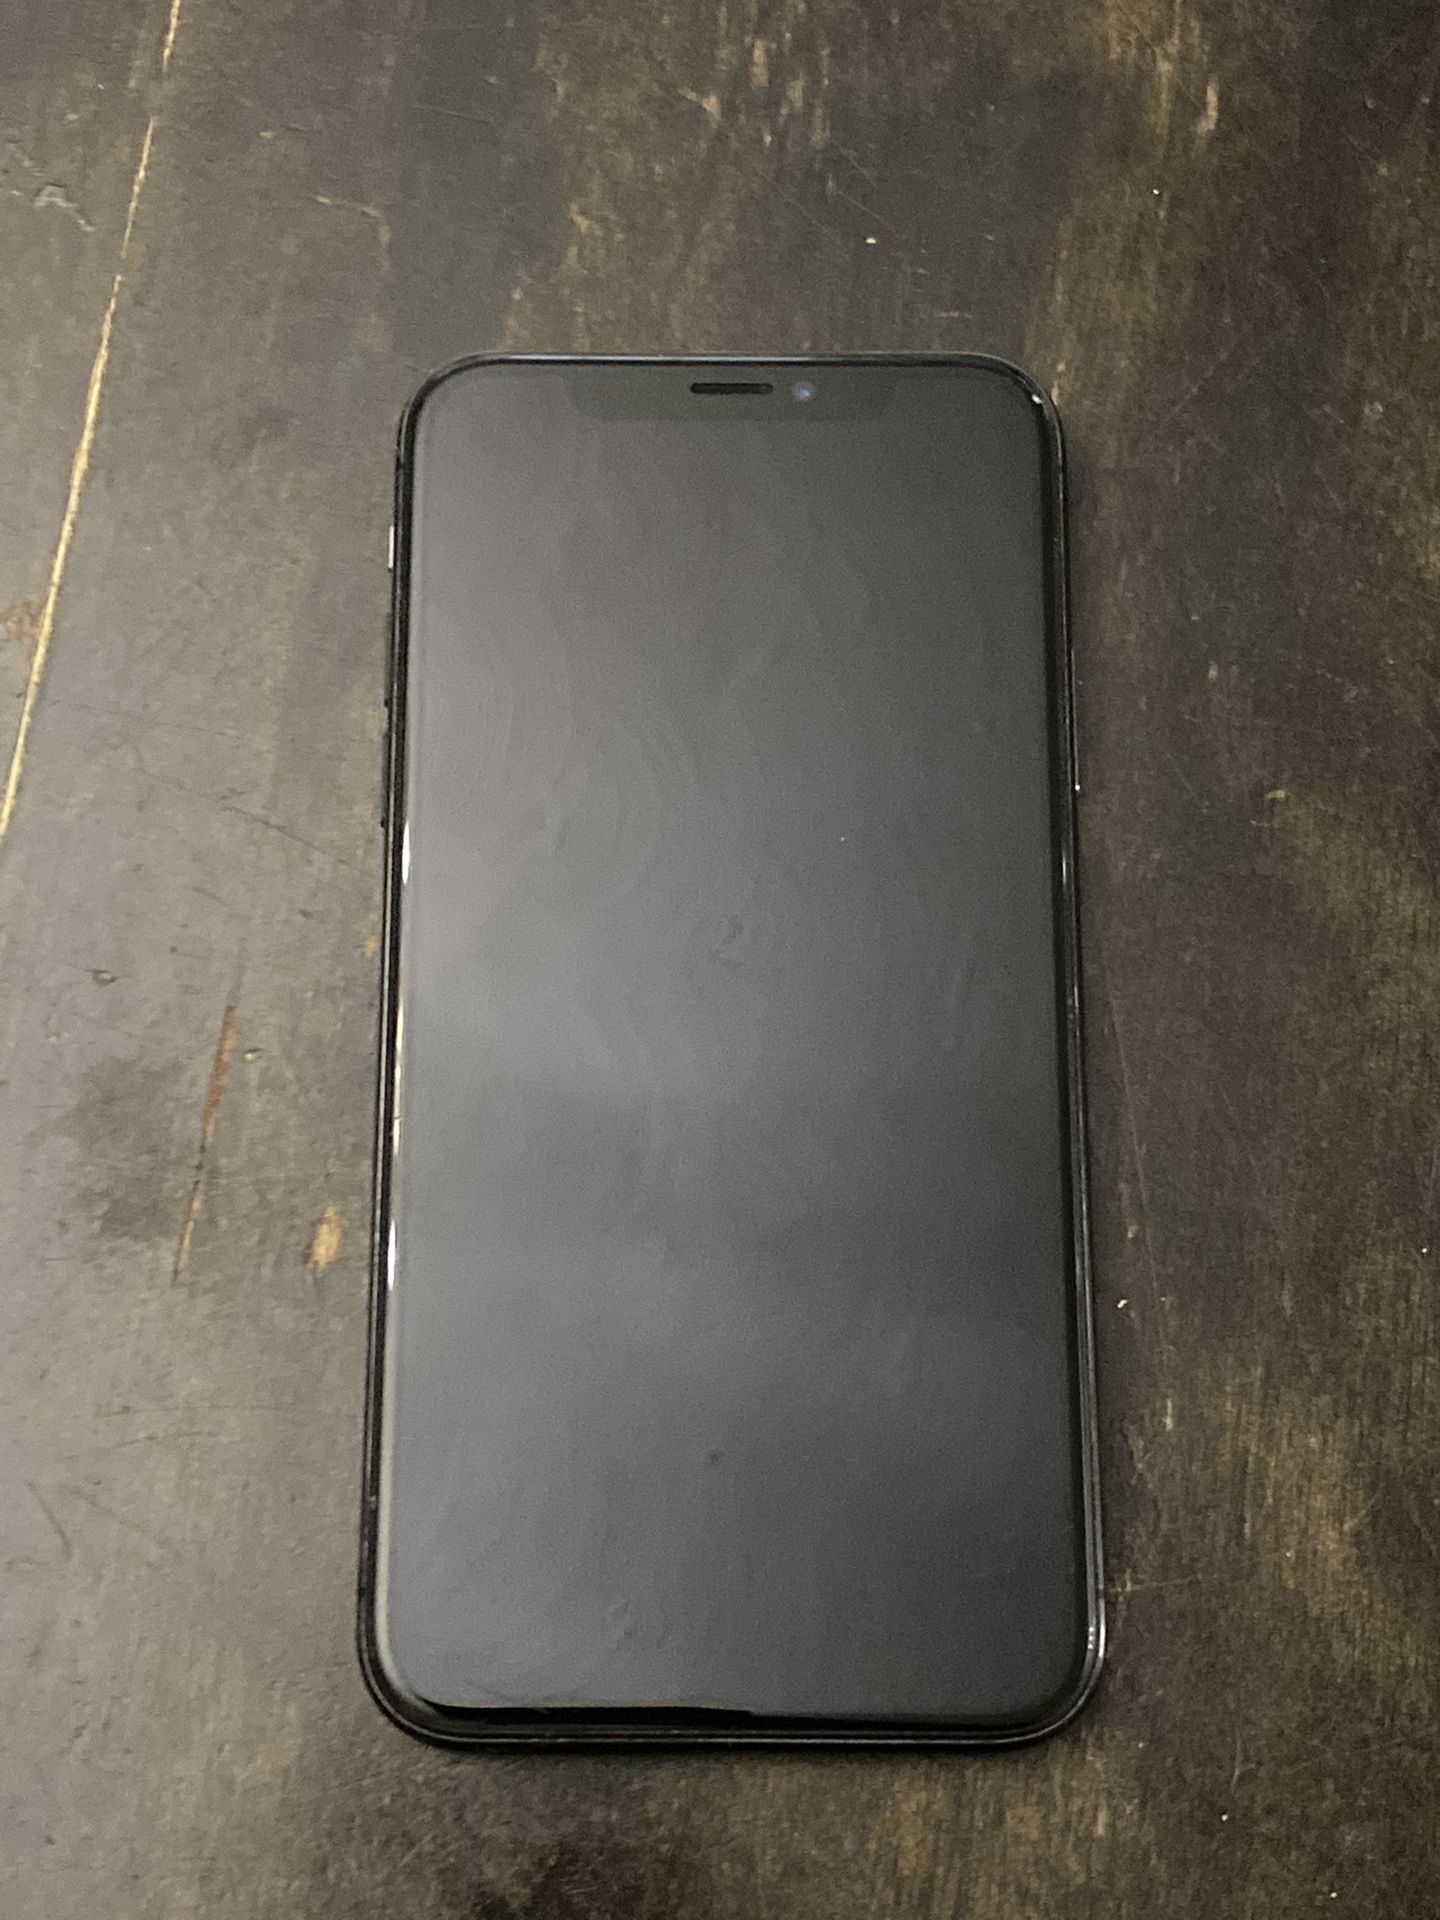 iPhone X 256gb for AT&T